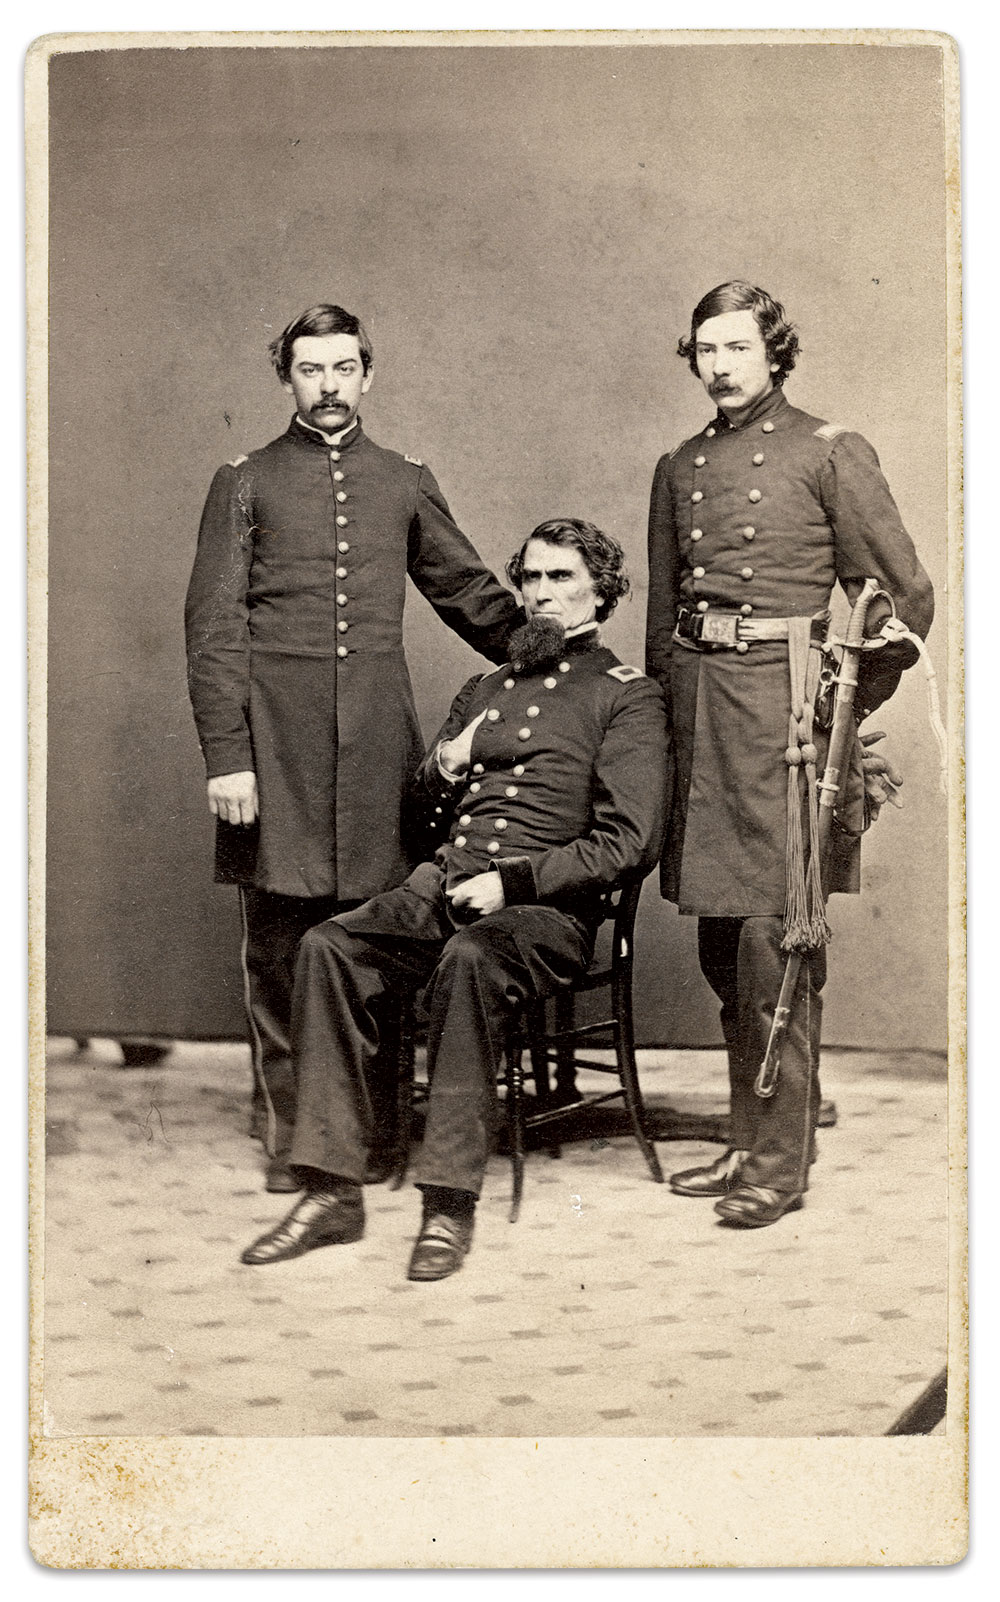 Flanked by his sons: With William, left, and John. Carte de visite by Gutekunst of Philadelphia, Pa. Author’s collection.